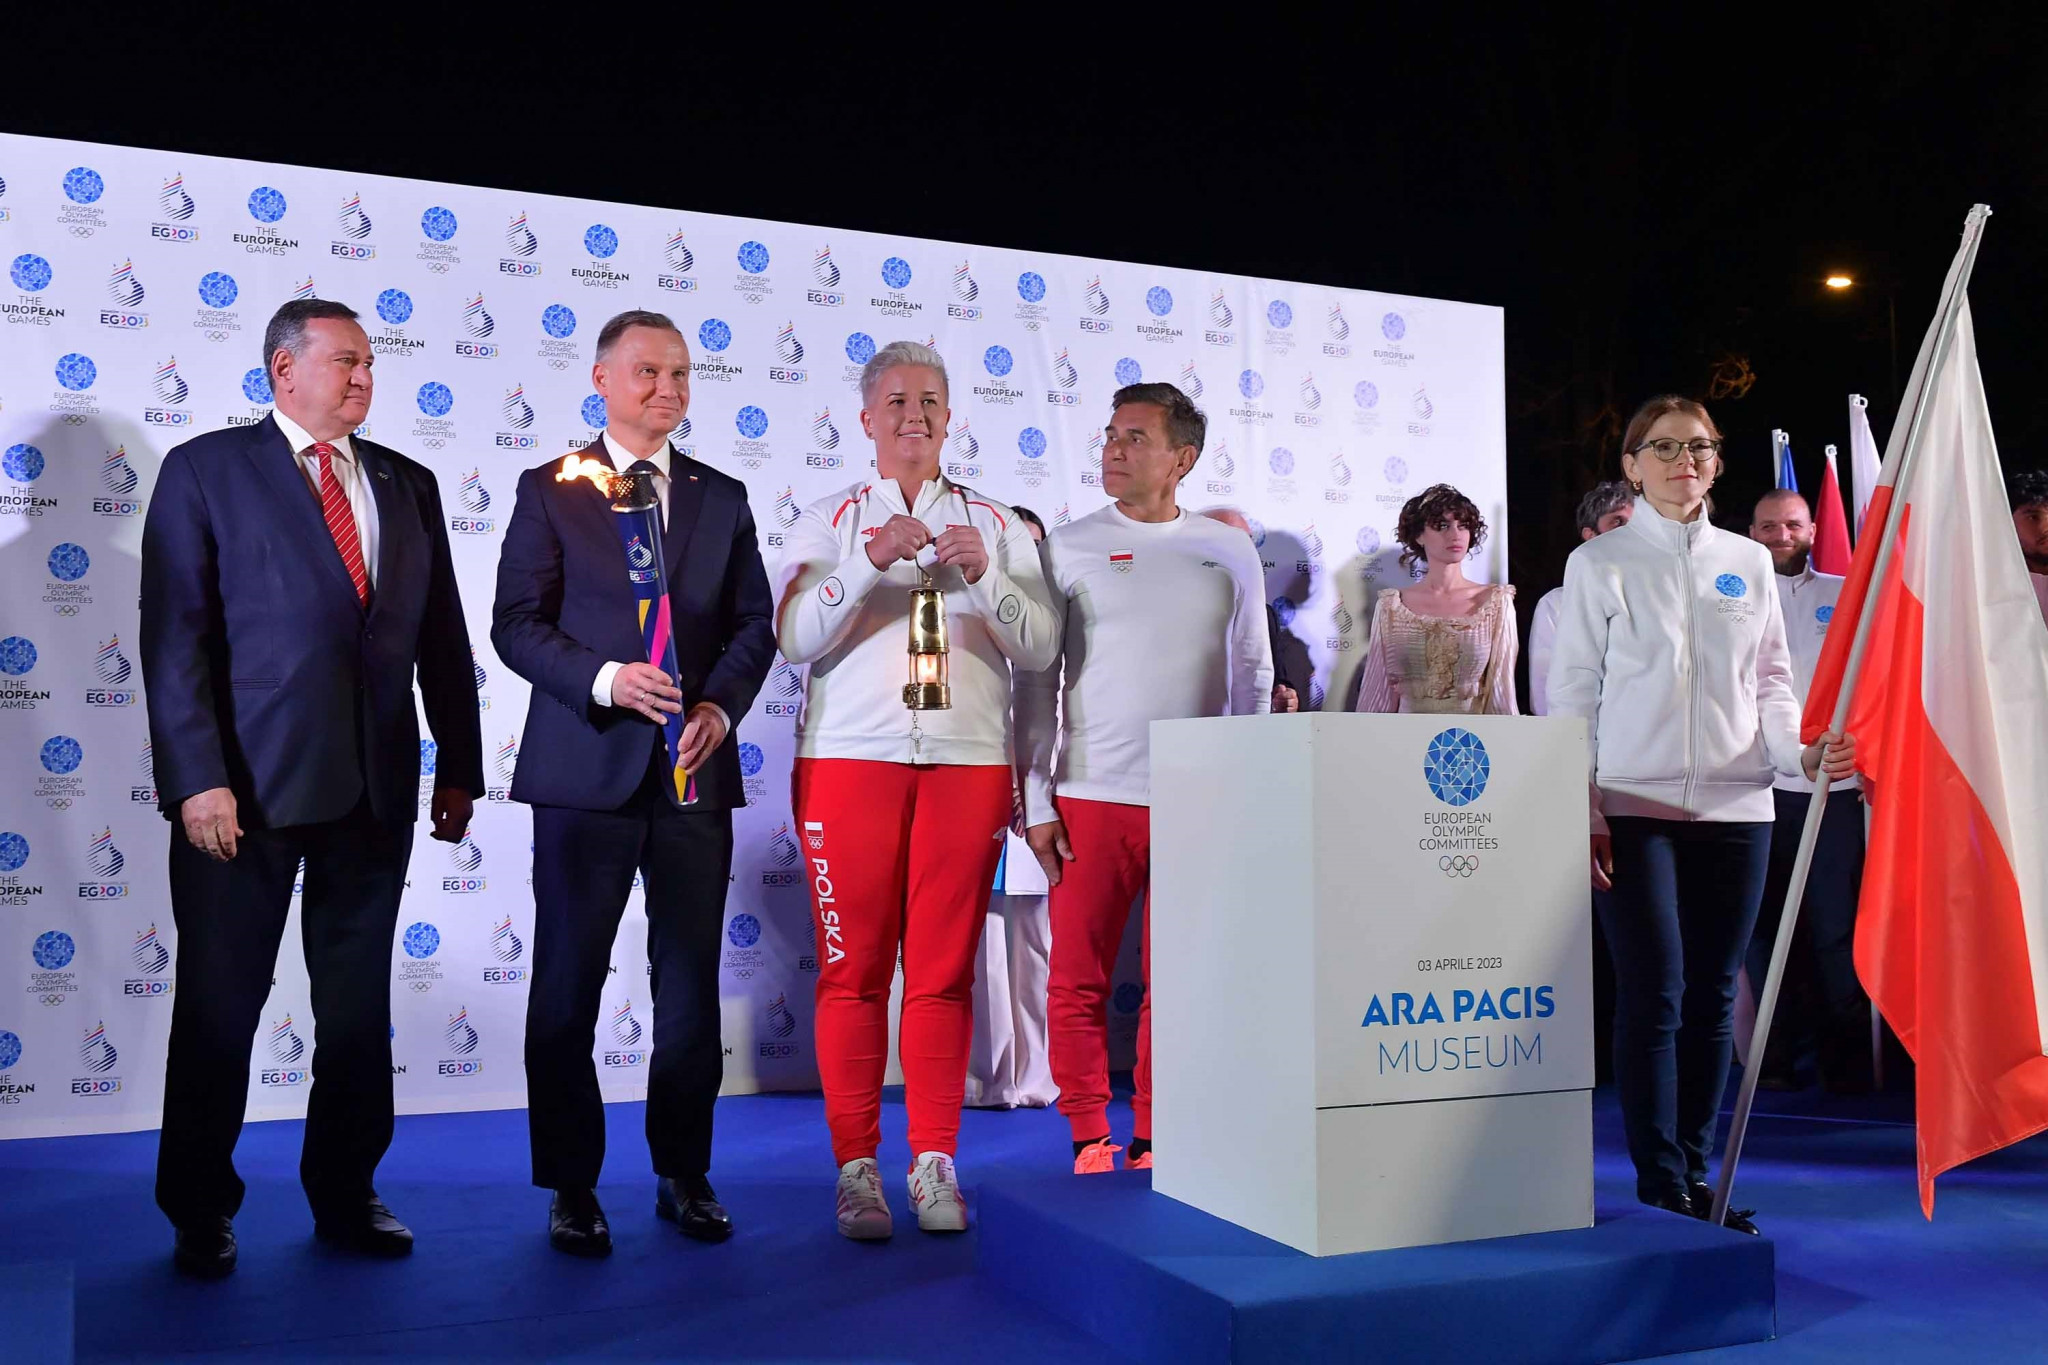 Polish three-time Olympic hammer throw champion Anita Włodarczyk received the Flame of Peace in a lantern that will be taken to Poland before the European Games ©EOC